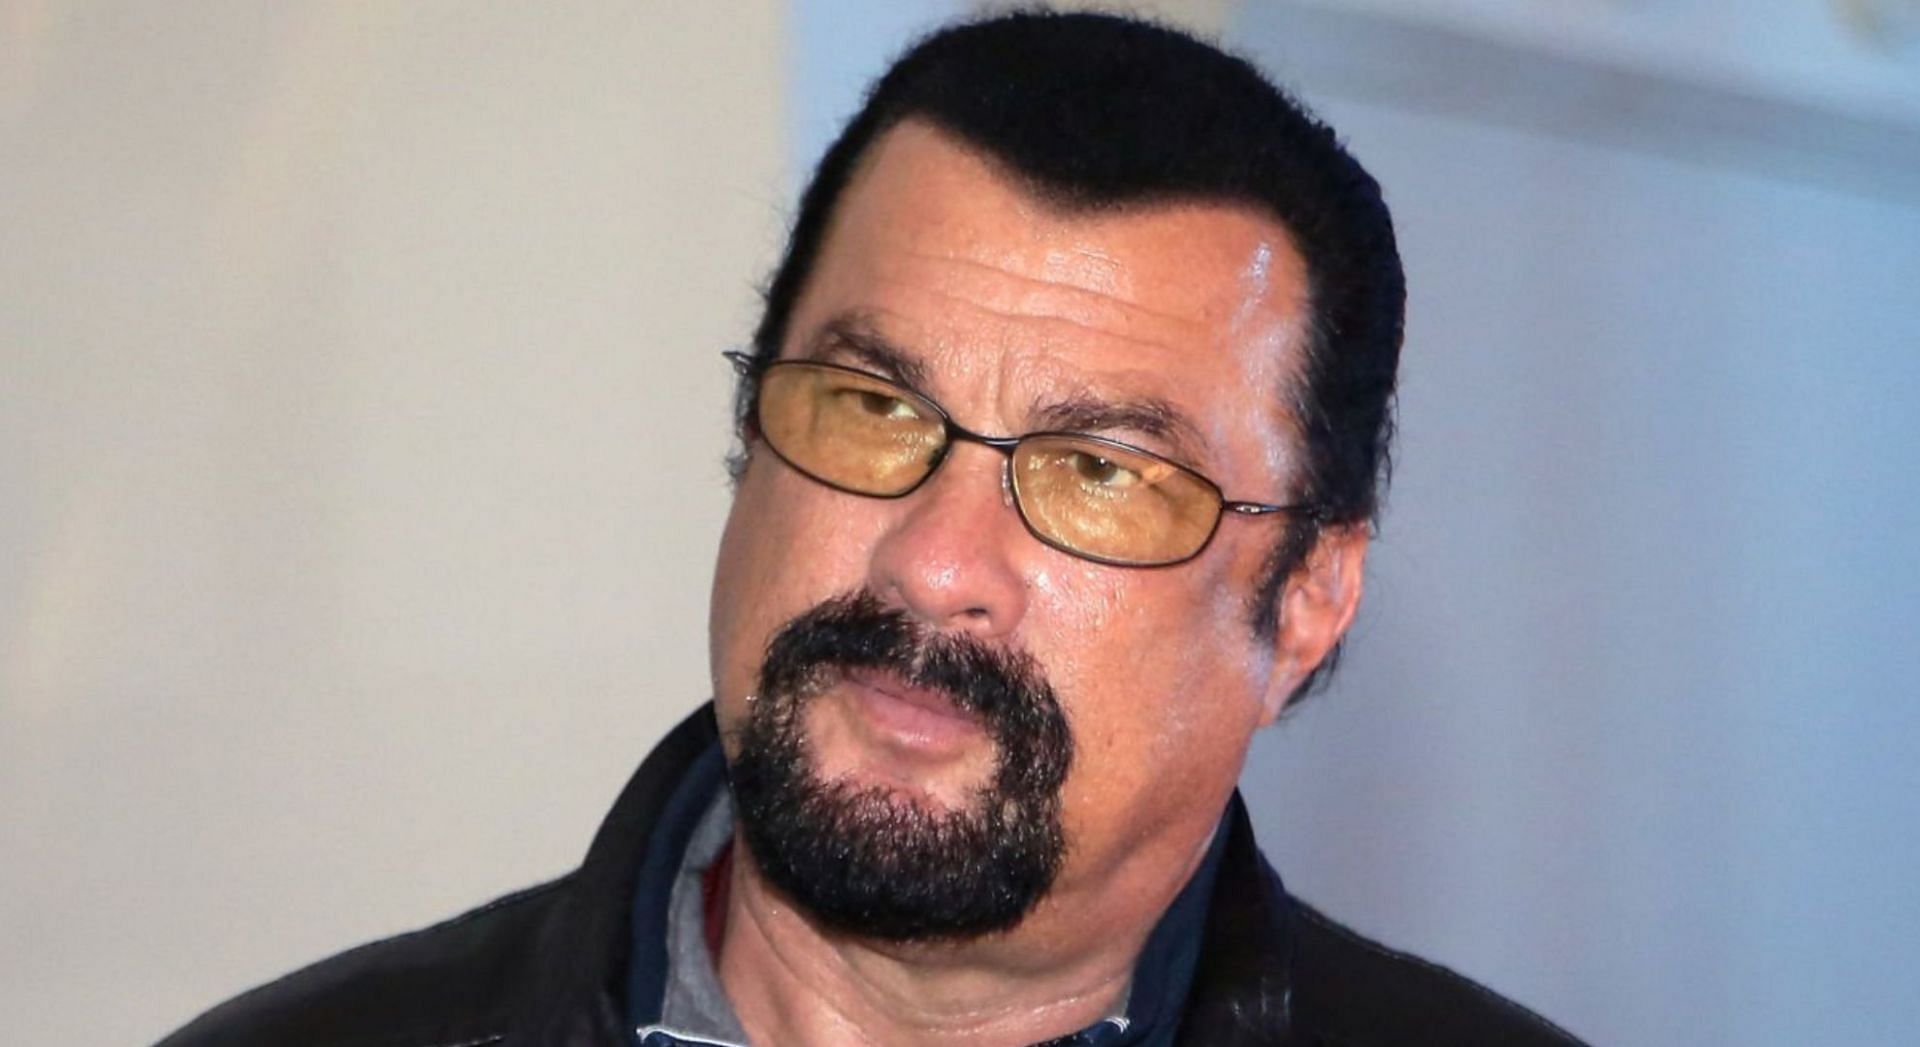 American actor Steven Seagal reportedly visited Russian prison camp in Ukraine&rsquo;s Olenivka (Image via Getty Images)